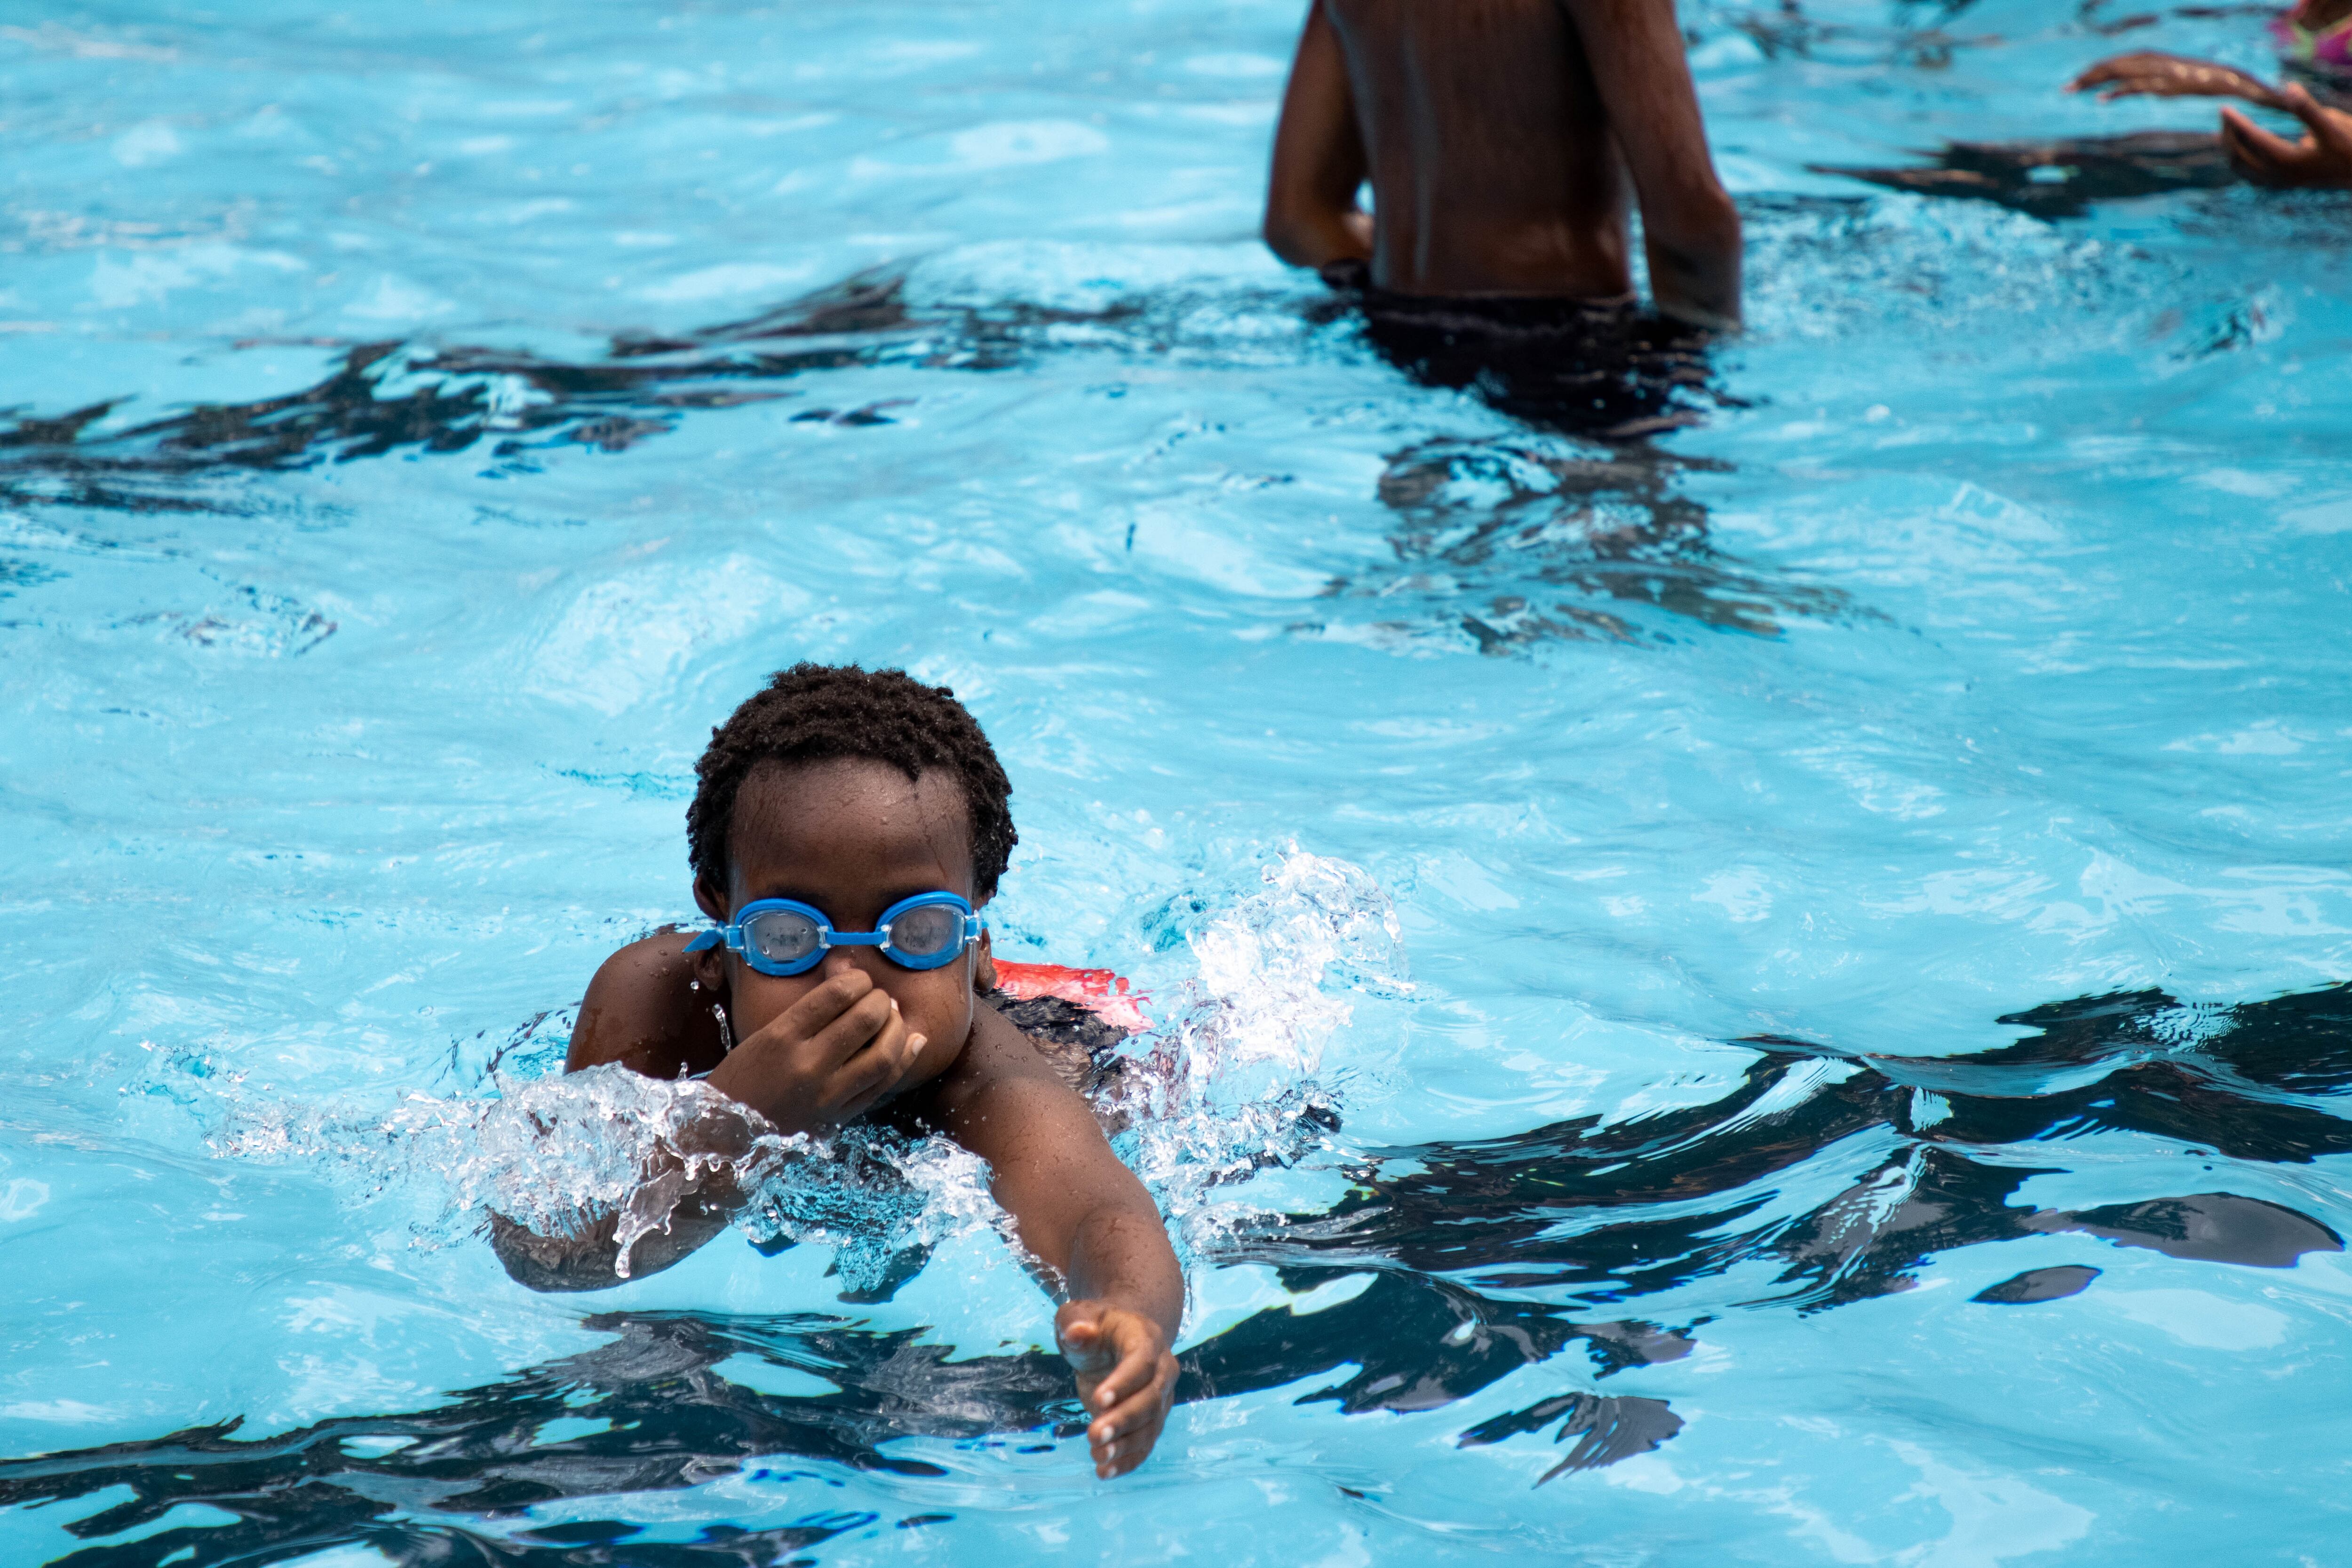 A child with blue goggles holds his nose as he swims in an outdoor pool.